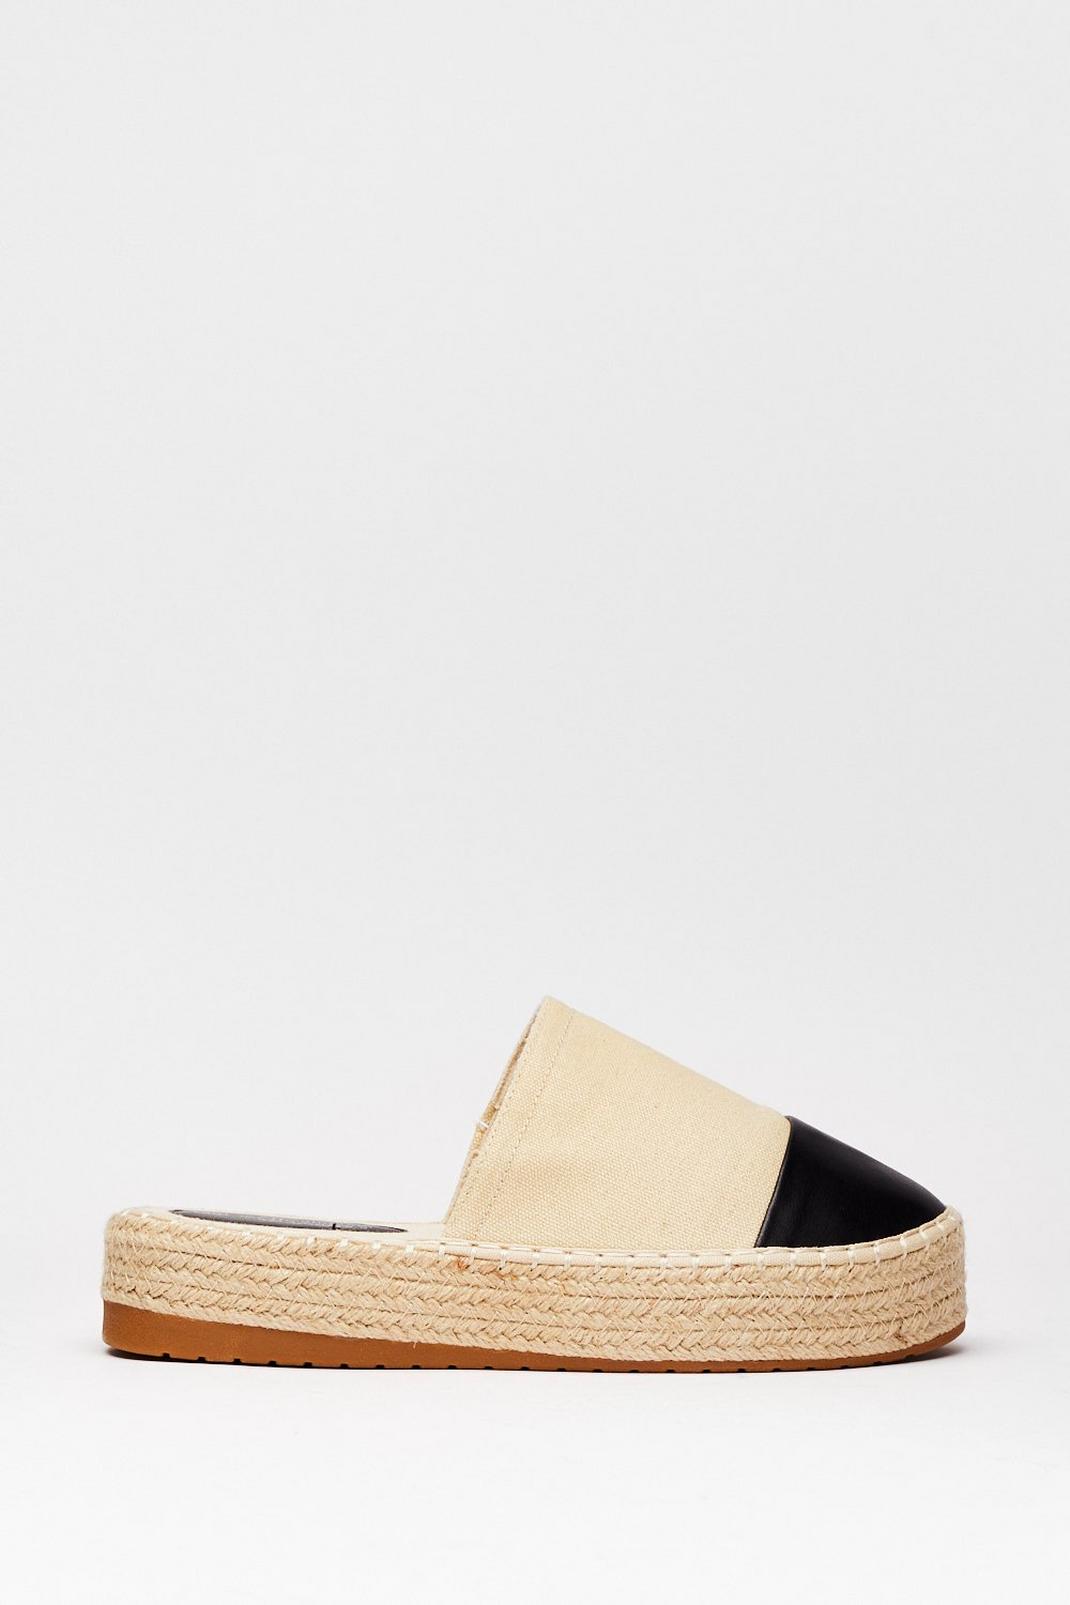 Moscow Mule or Two-Tone Flatform Mules image number 1